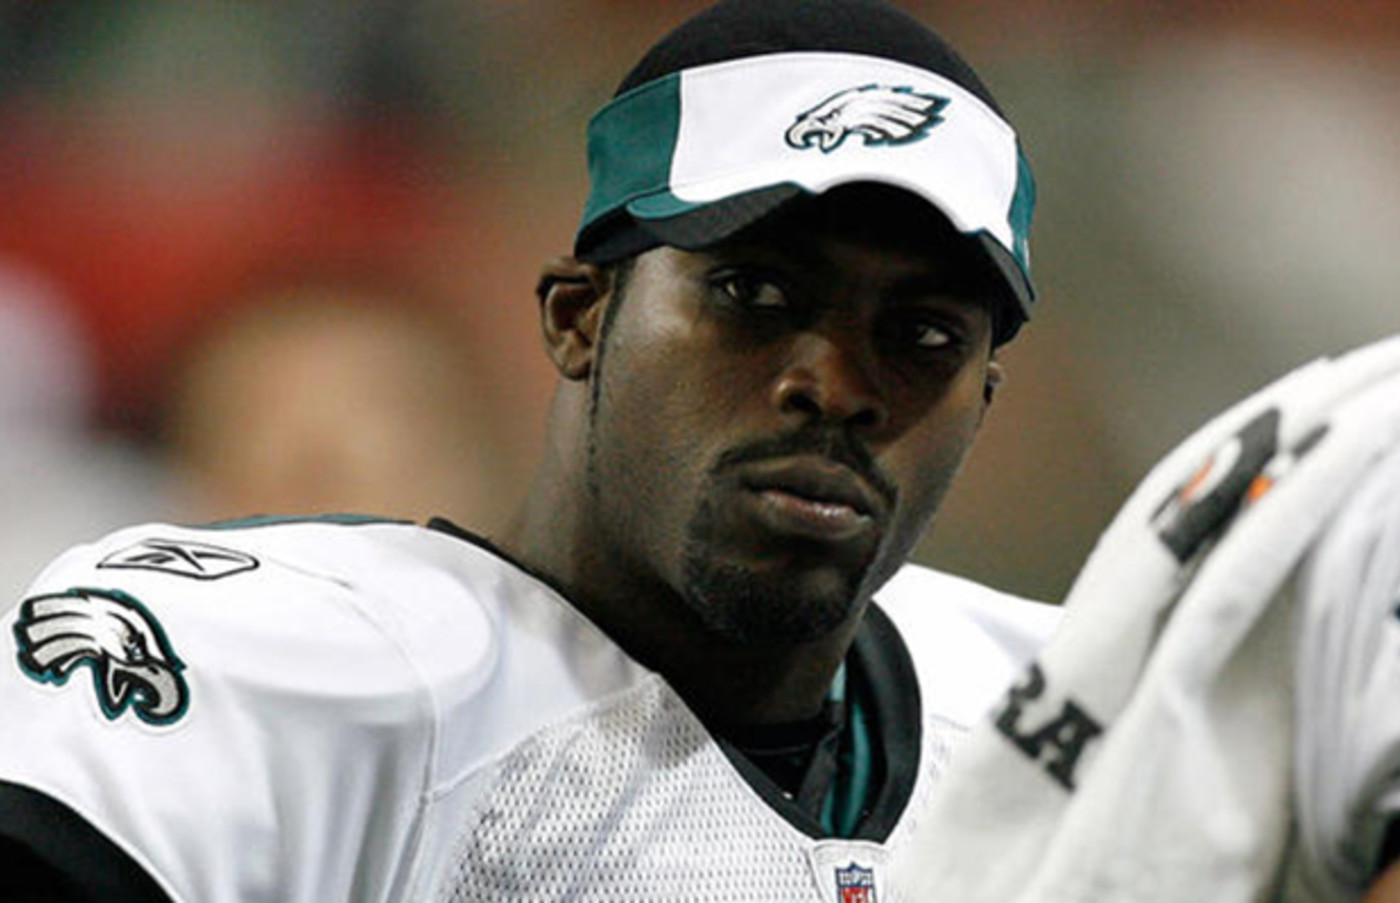 What does Michael Vick do for a living?